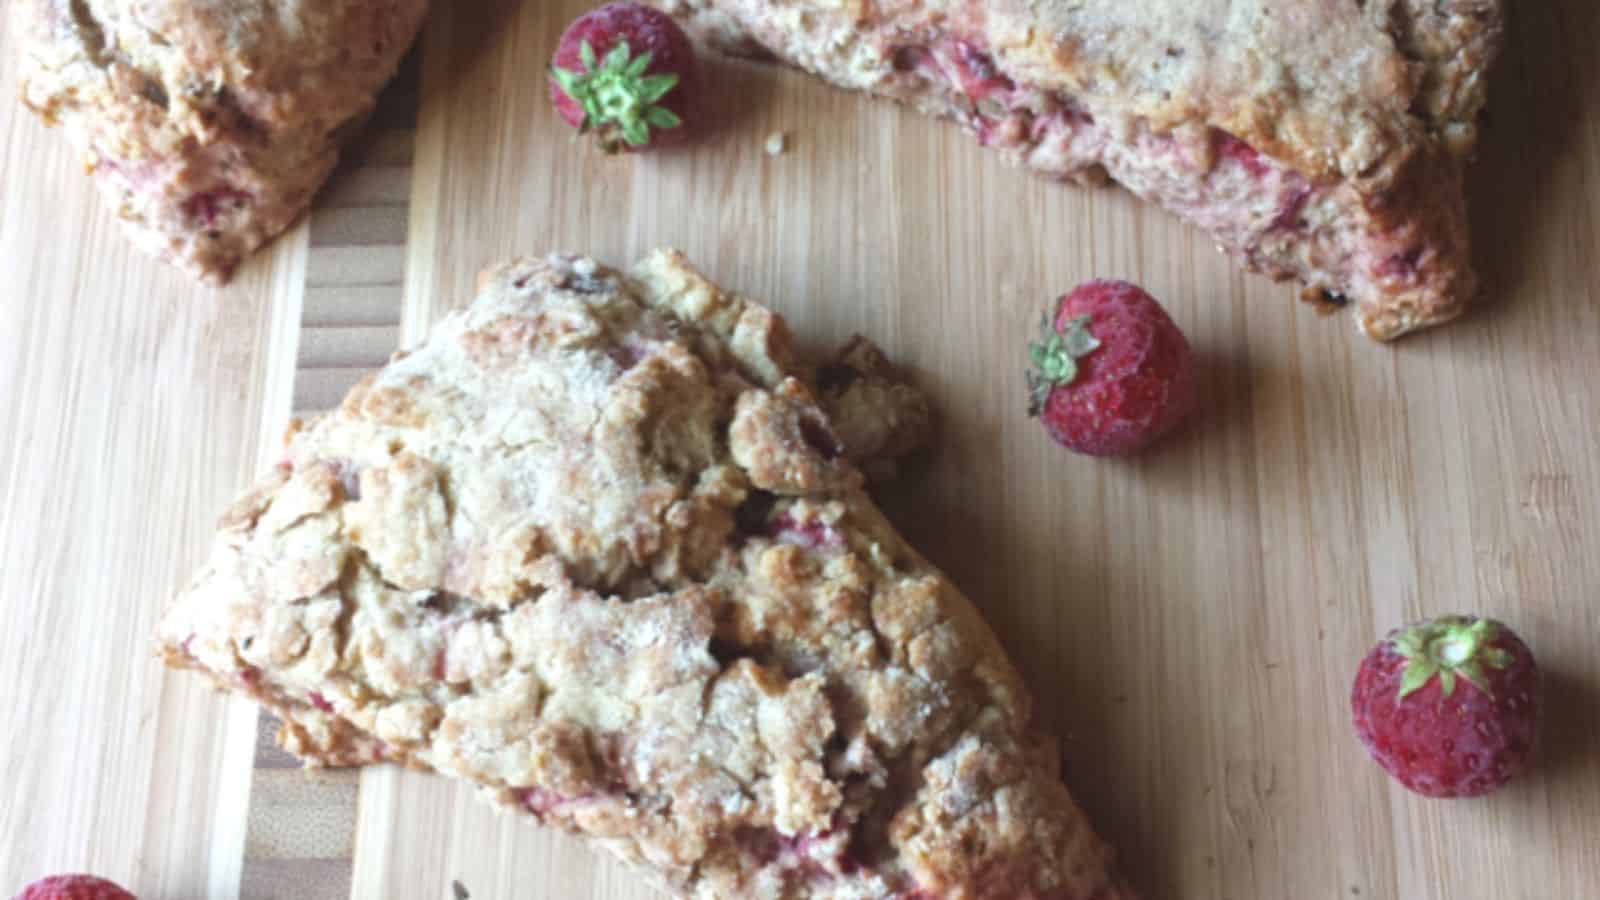 Image shows an overhead shot of Strawberry bacon scones on a wooden cutting board.